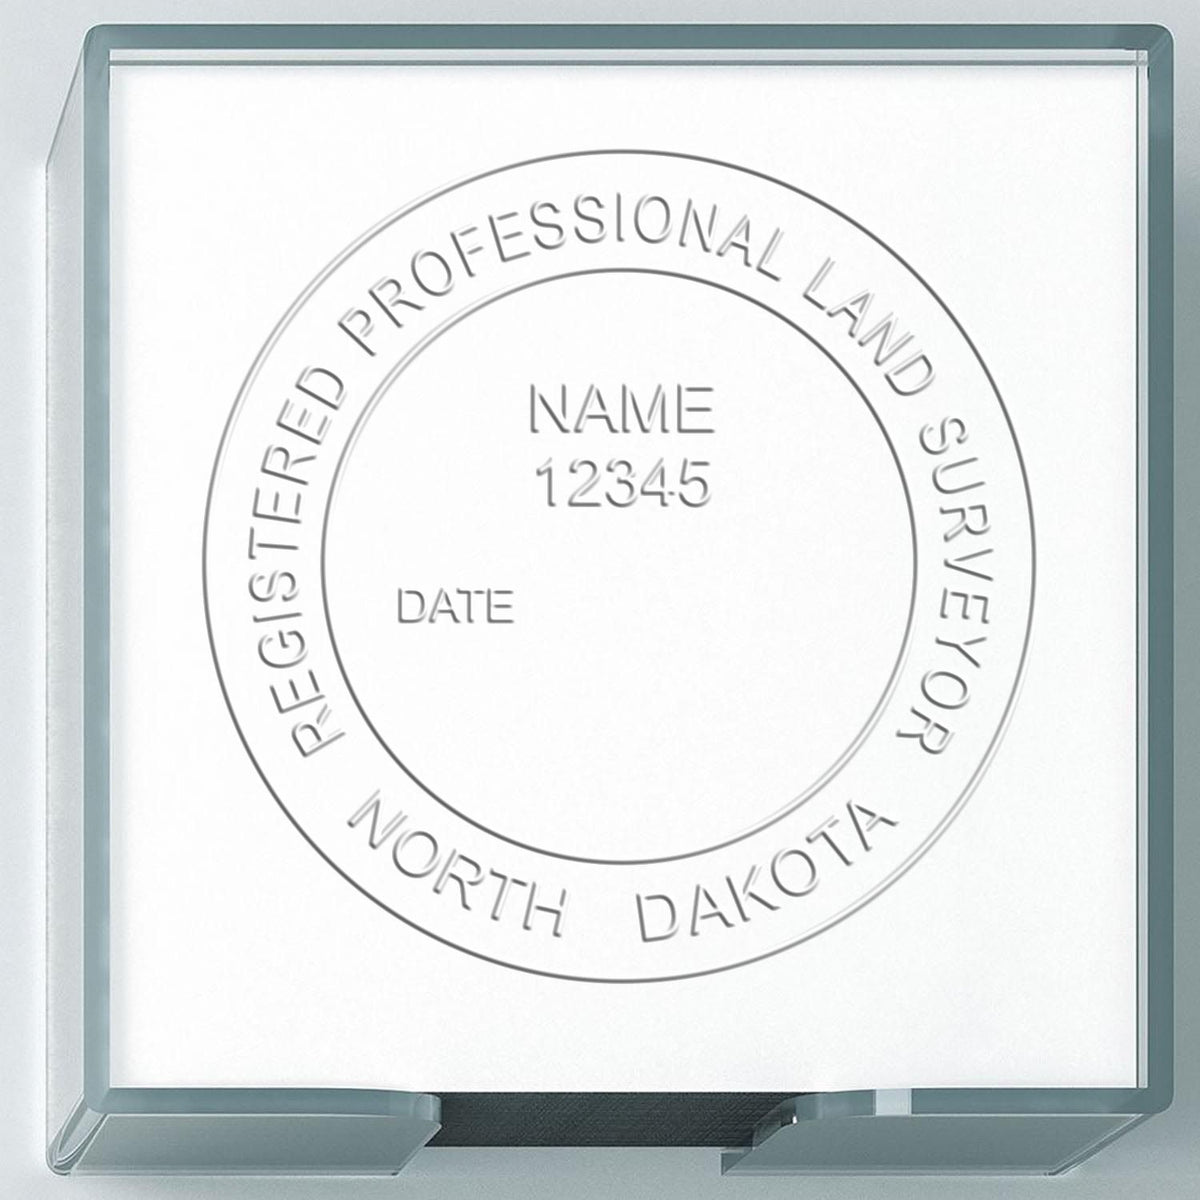 A stamped imprint of the Gift North Dakota Land Surveyor Seal in this stylish lifestyle photo, setting the tone for a unique and personalized product.